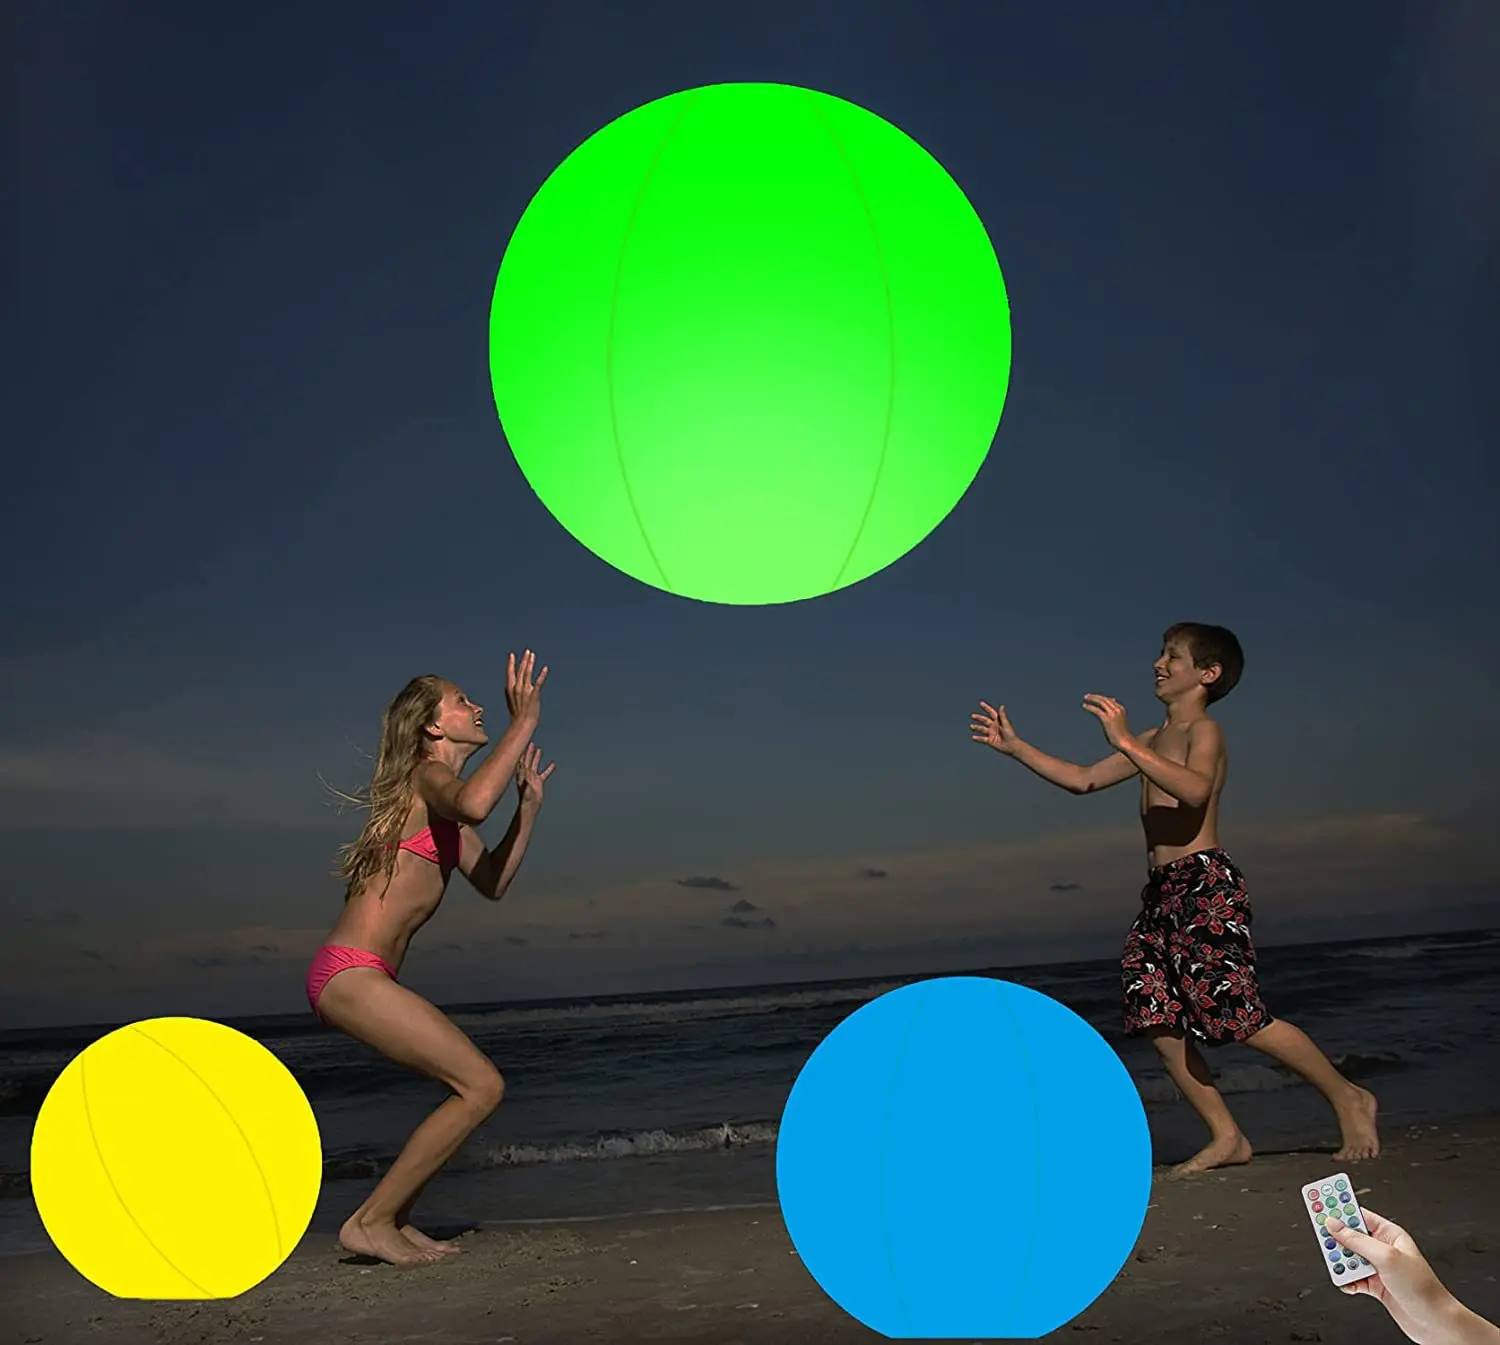 Water Decorative Ball Toys Glow In The Dark Beach Ball 40Cm/60Cm Inflatable Beach Ball With Lights And Remote Control